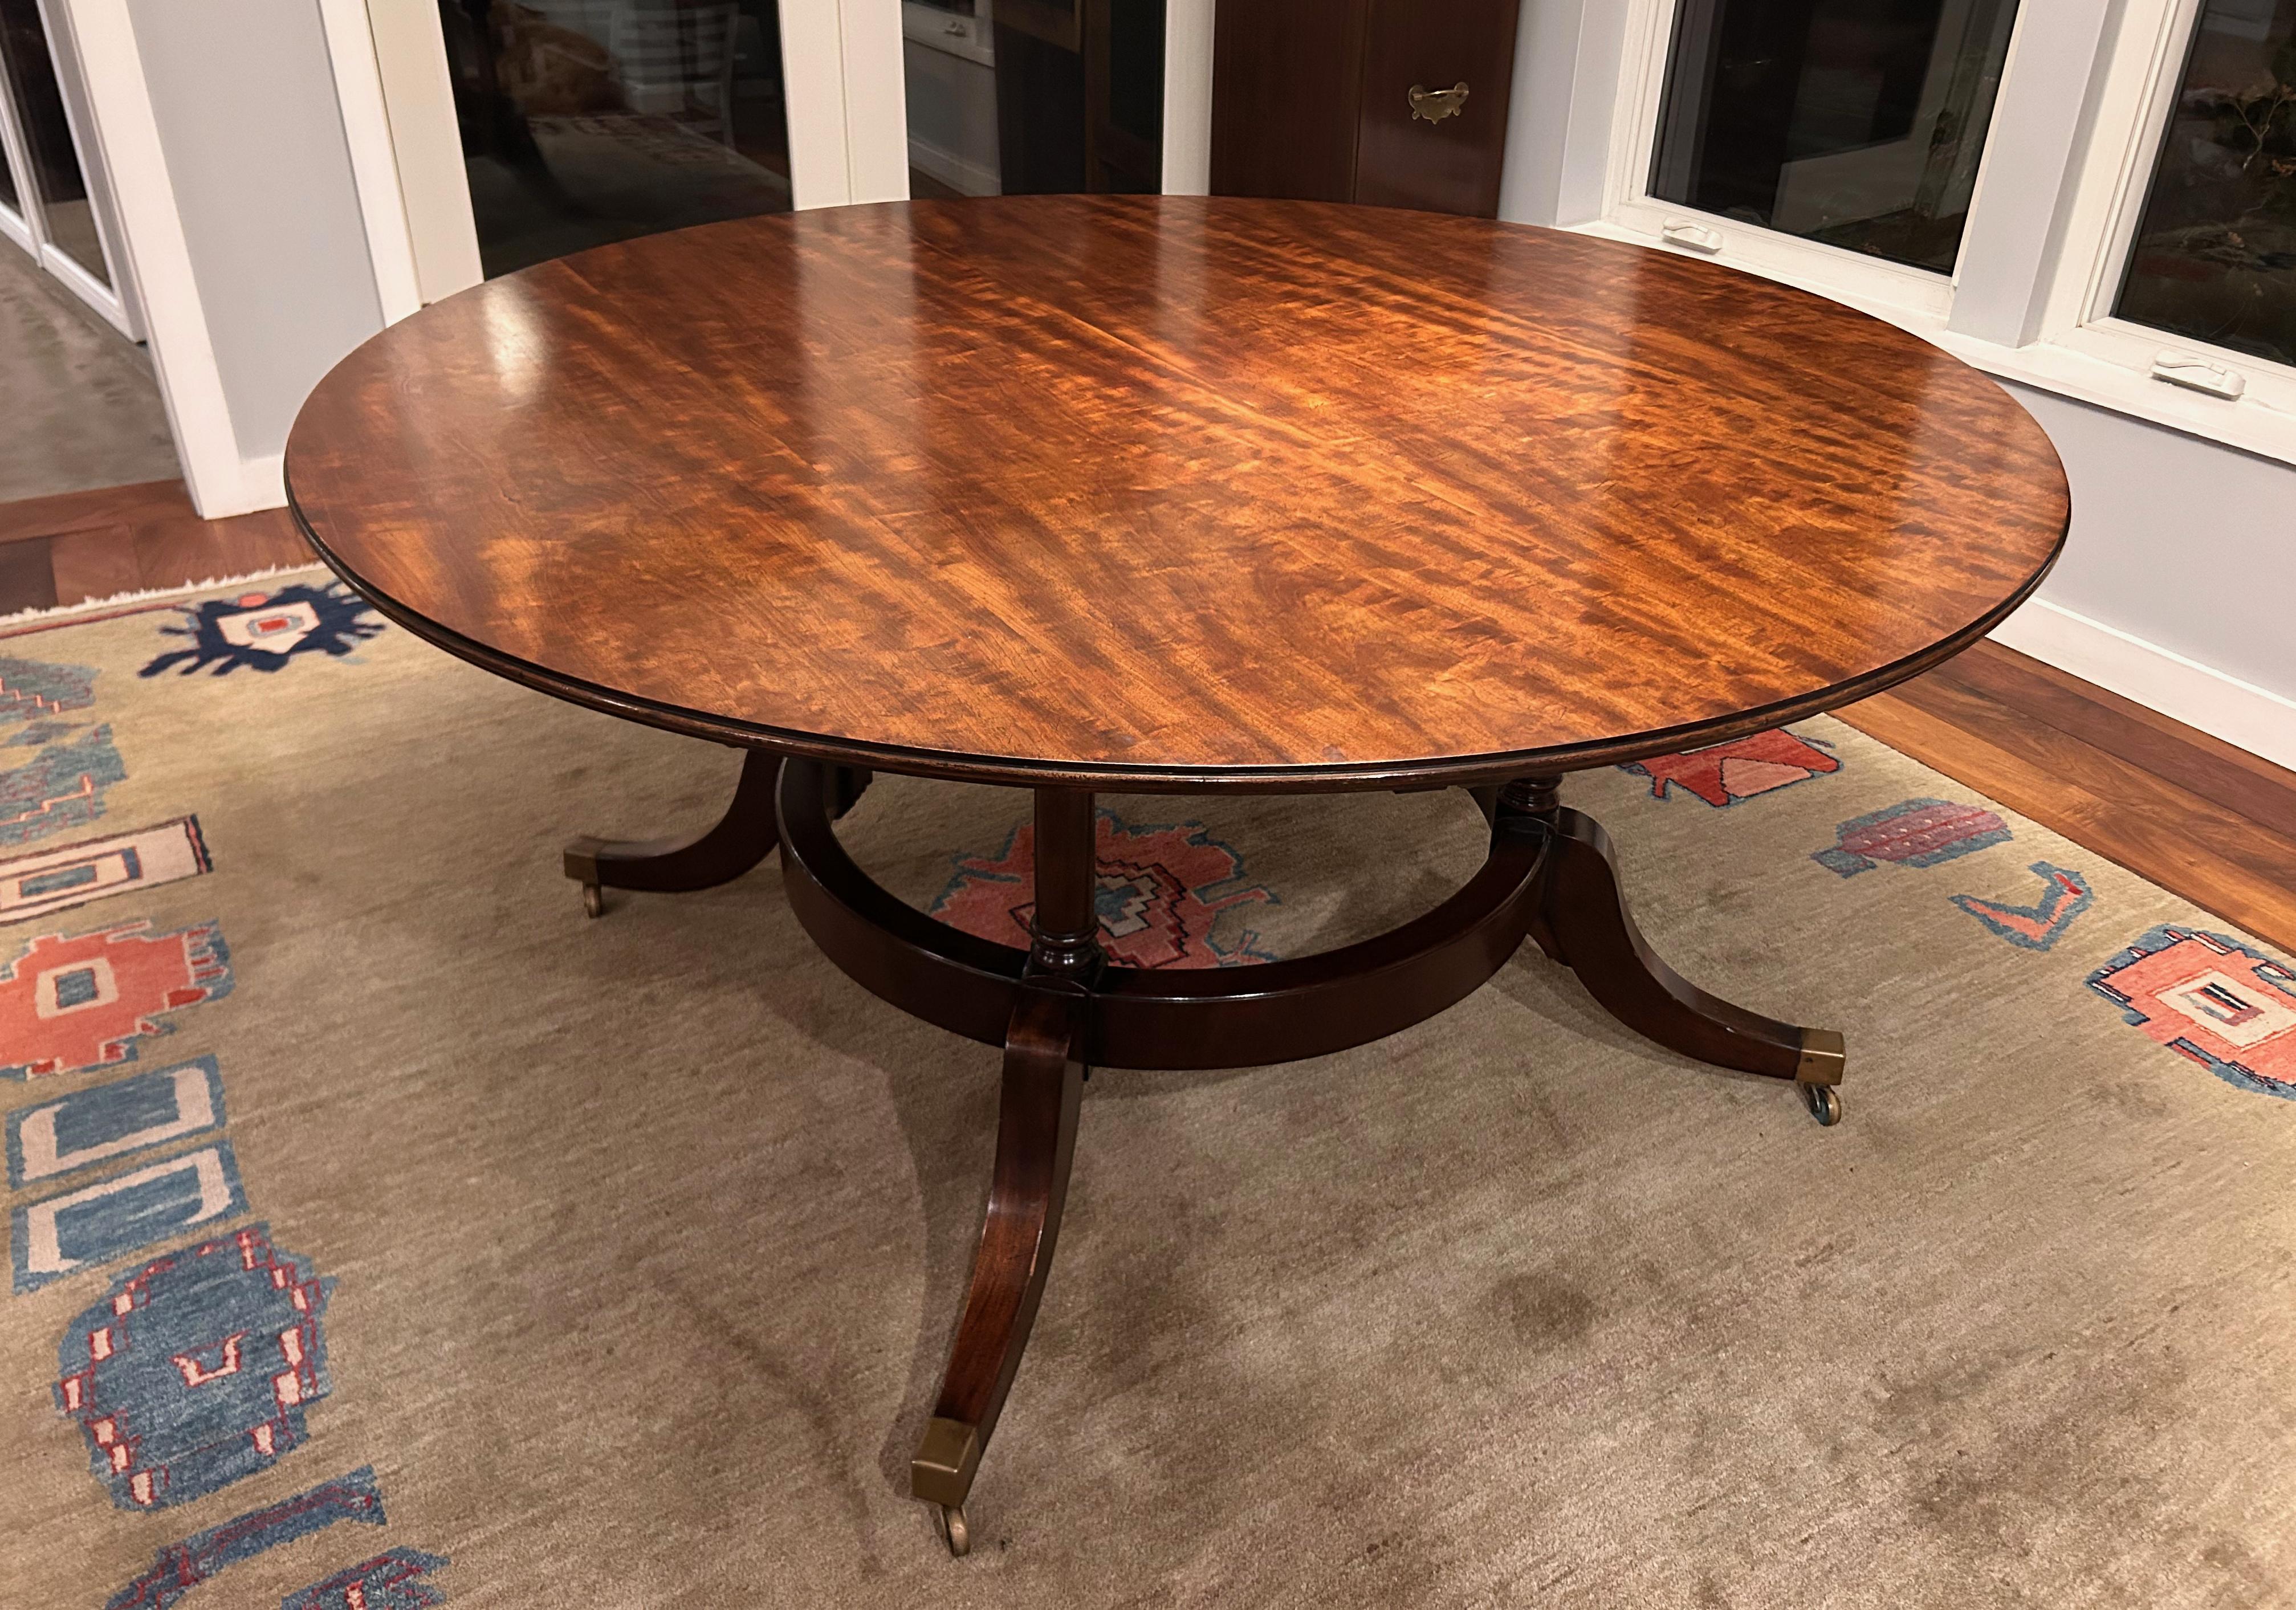 A 1940's round mahogany veneer dining table with fabulous crescent shaped leaves held in place by custom brass pins. Without leaves it is 60